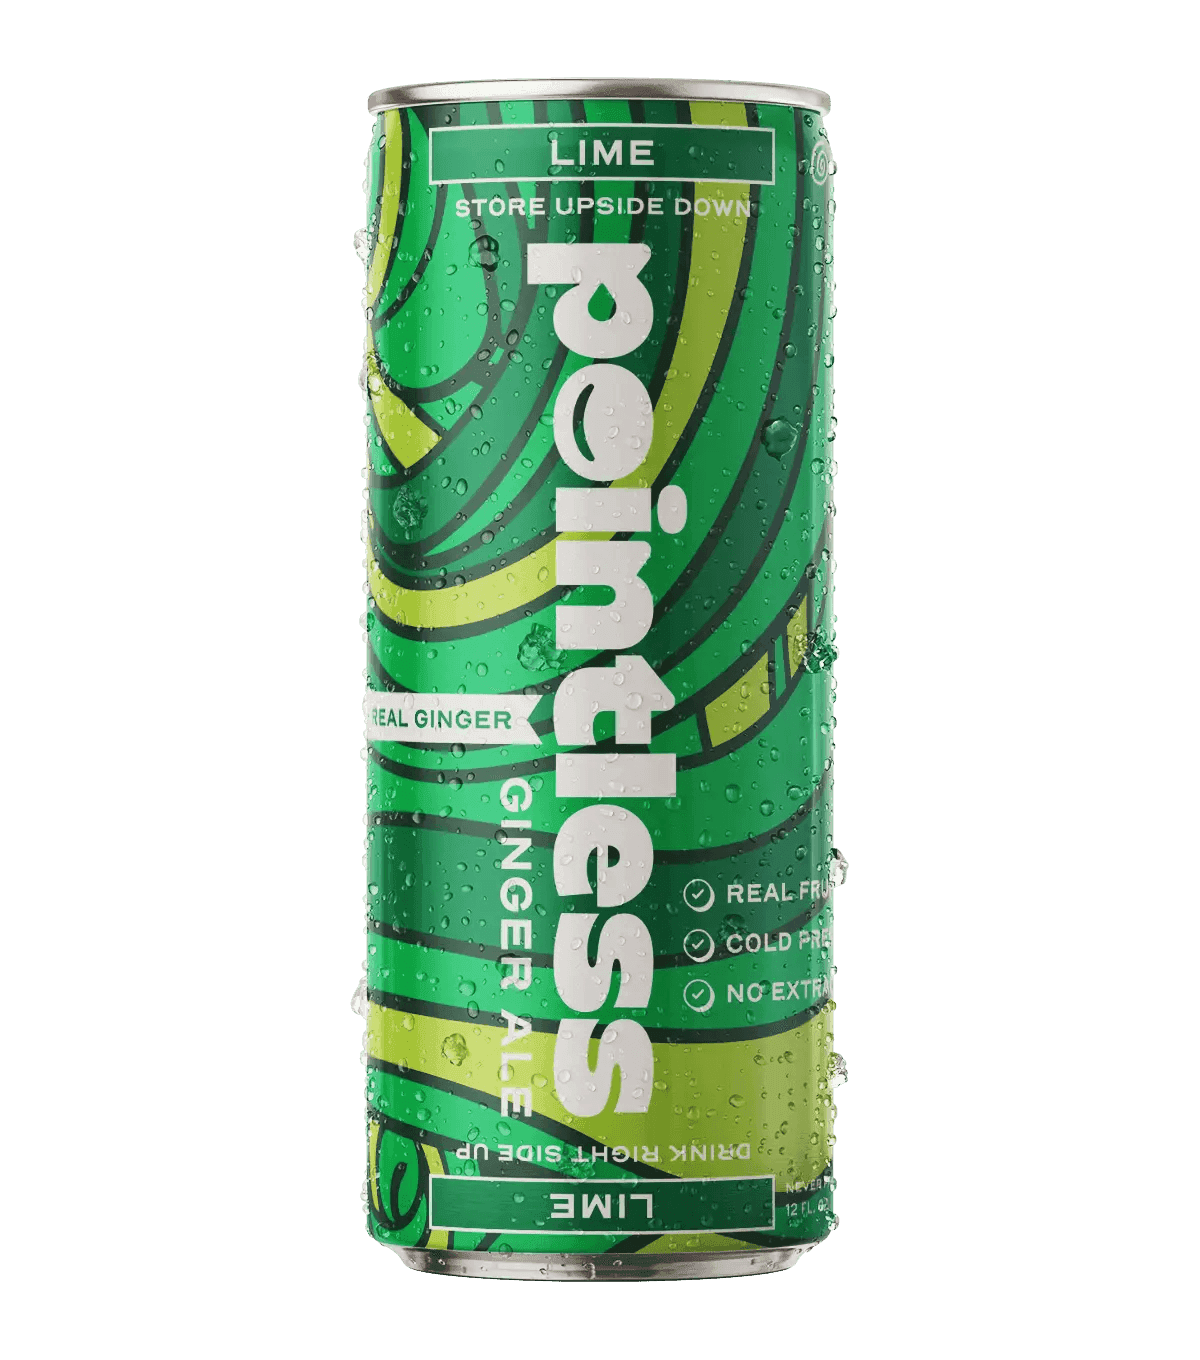 Pointless Lime Ginger Ale - 12pk - Pointless Ginger Ale